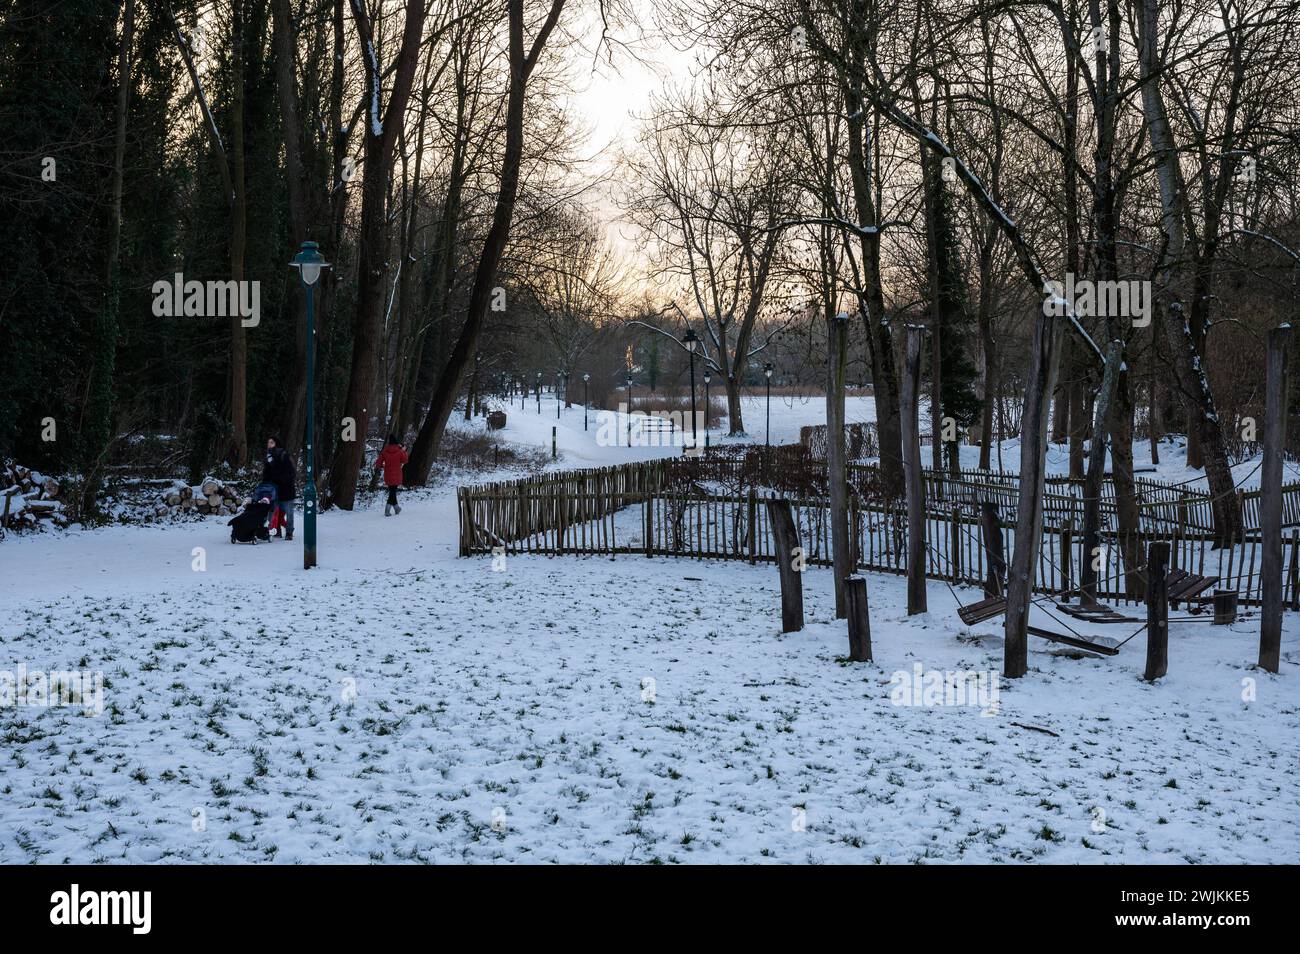 Jette, Brussels, Belgium, 21 January 2024 - Families with children walking in the snow in a city park Stock Photo